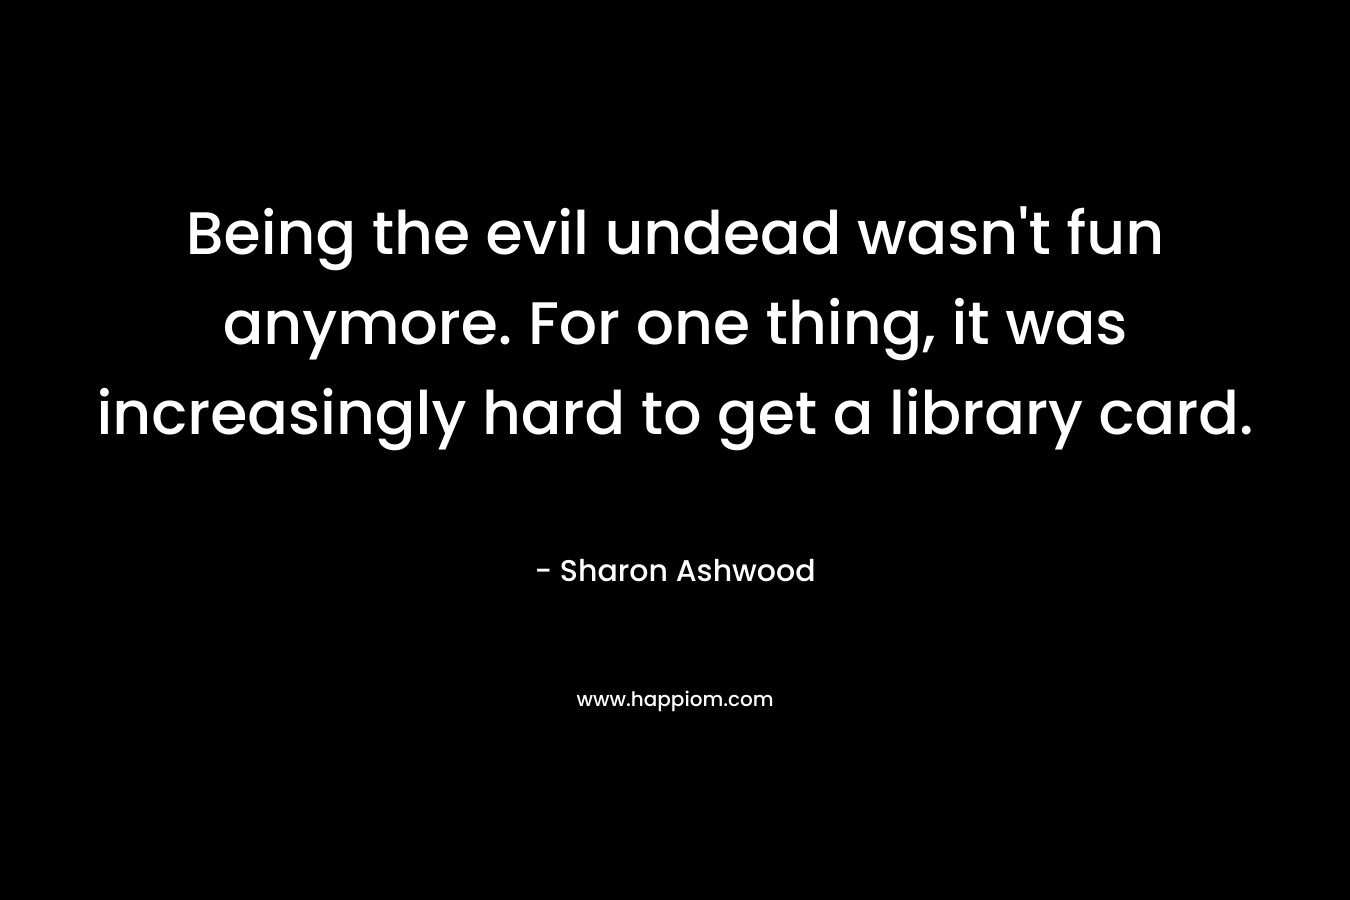 Being the evil undead wasn't fun anymore. For one thing, it was increasingly hard to get a library card.